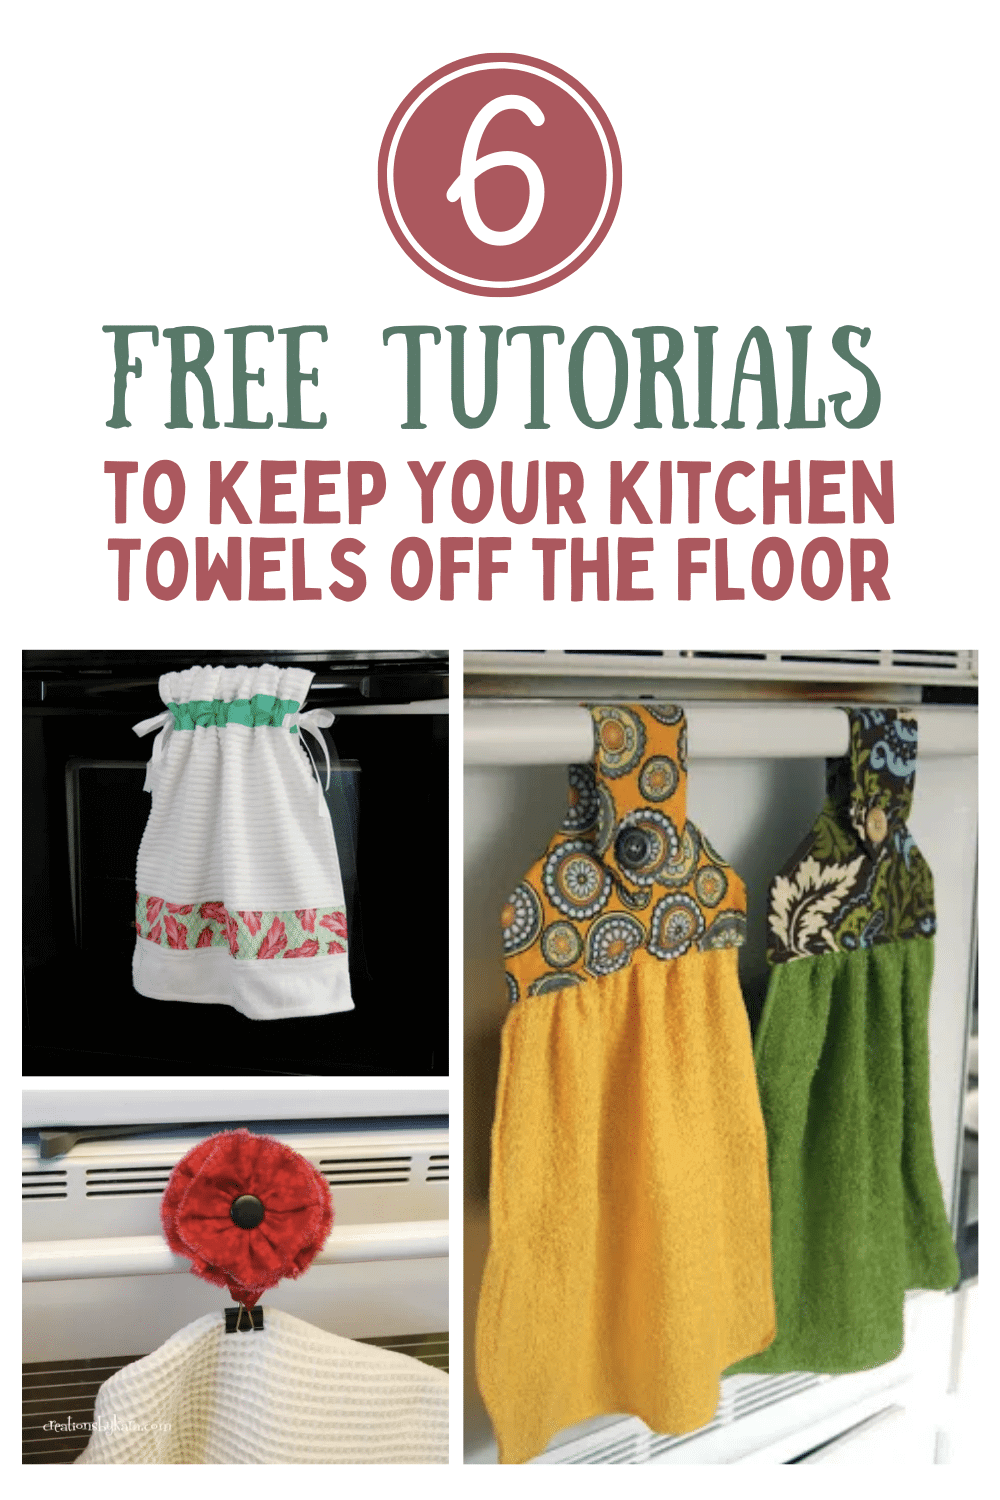 https://dropinblog.net/34252681/files/featured/6-FREE-Tutorials-to-Keep-Your-Kitchen-Towels-off-the-Floor.png